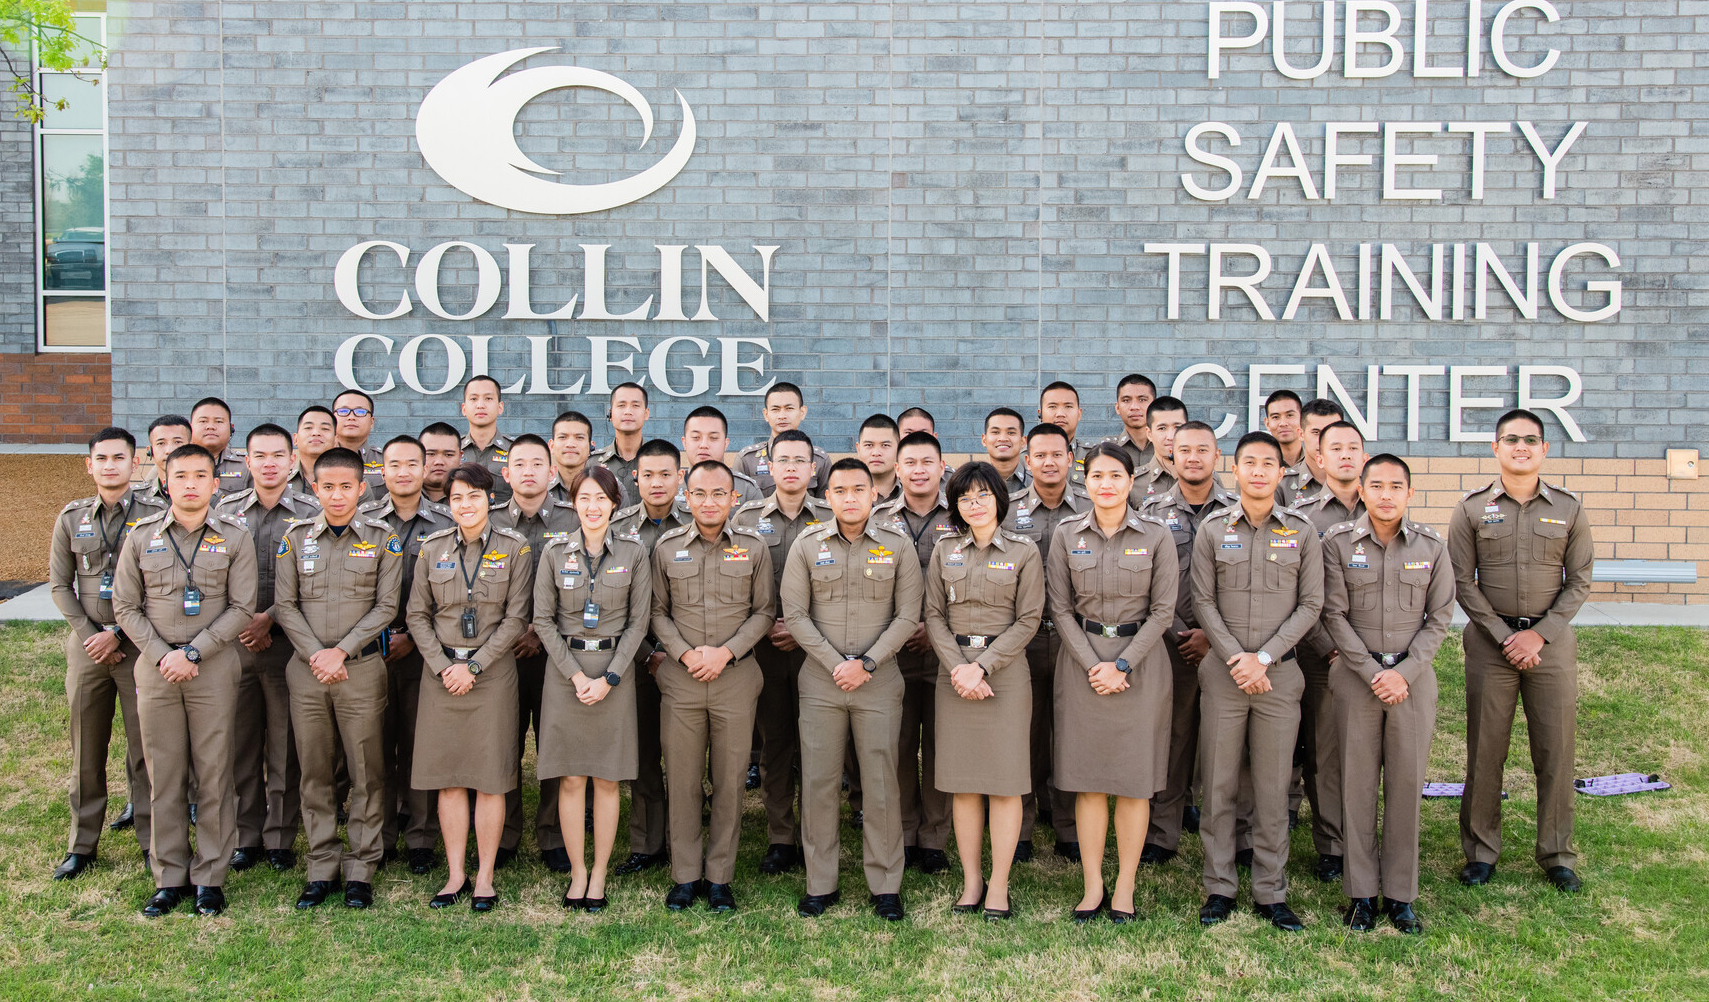 FORTY Royal Thai Police captains visited the Collin College Public Safety Training Center in March.